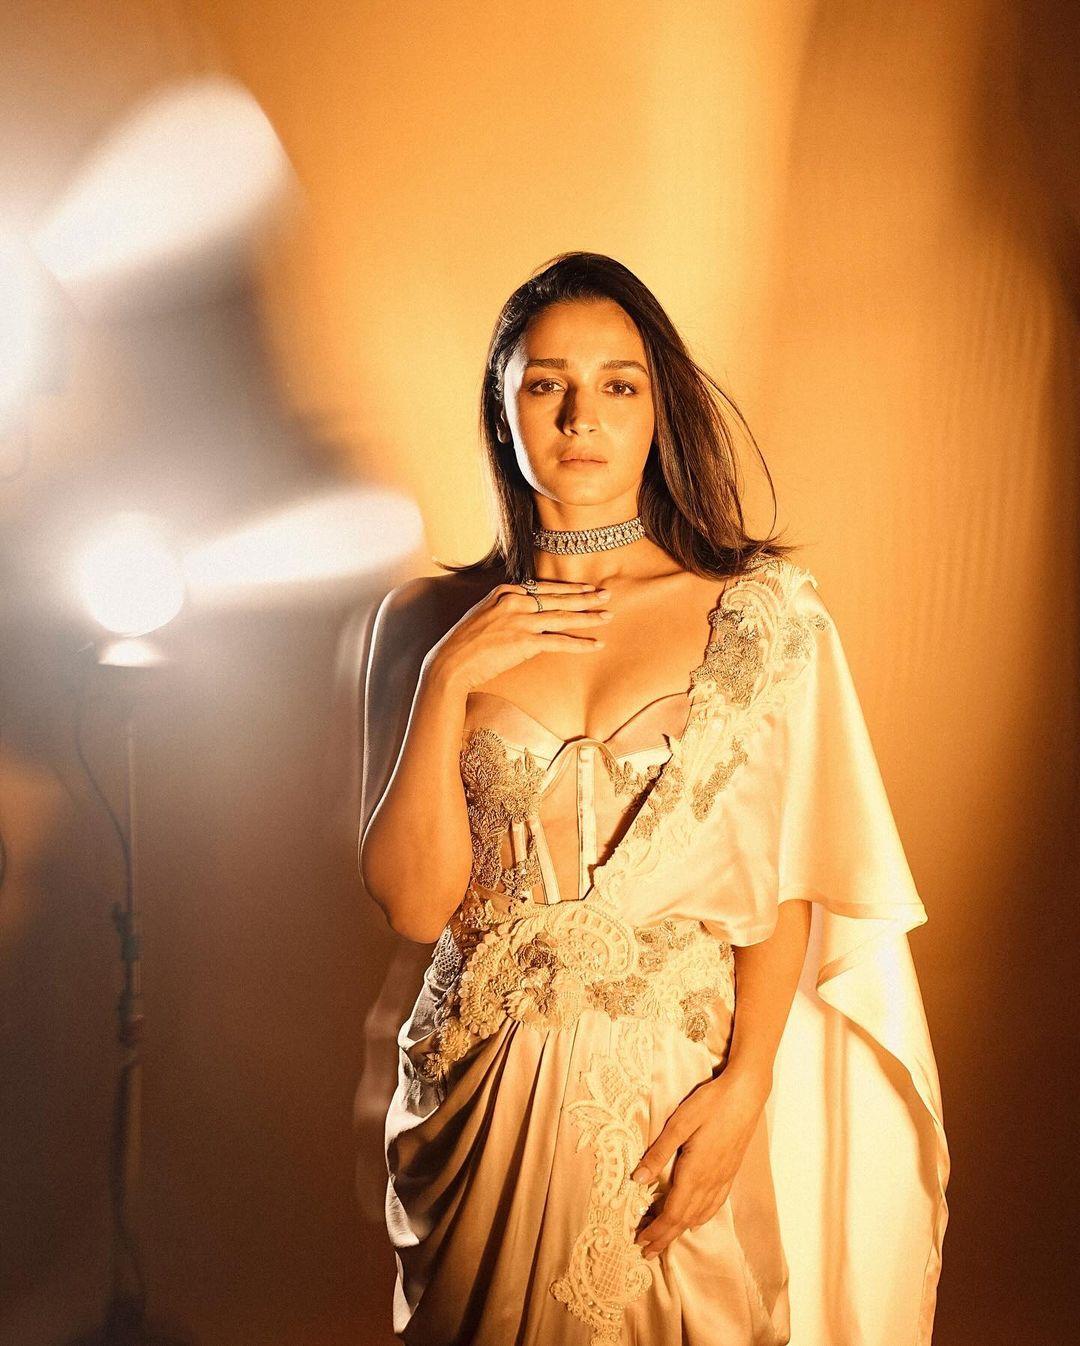 Her white ensemble offered a modern interpretation of the traditional saree, with a blouse that resembled a corset and a saree draped in a contemporary style.